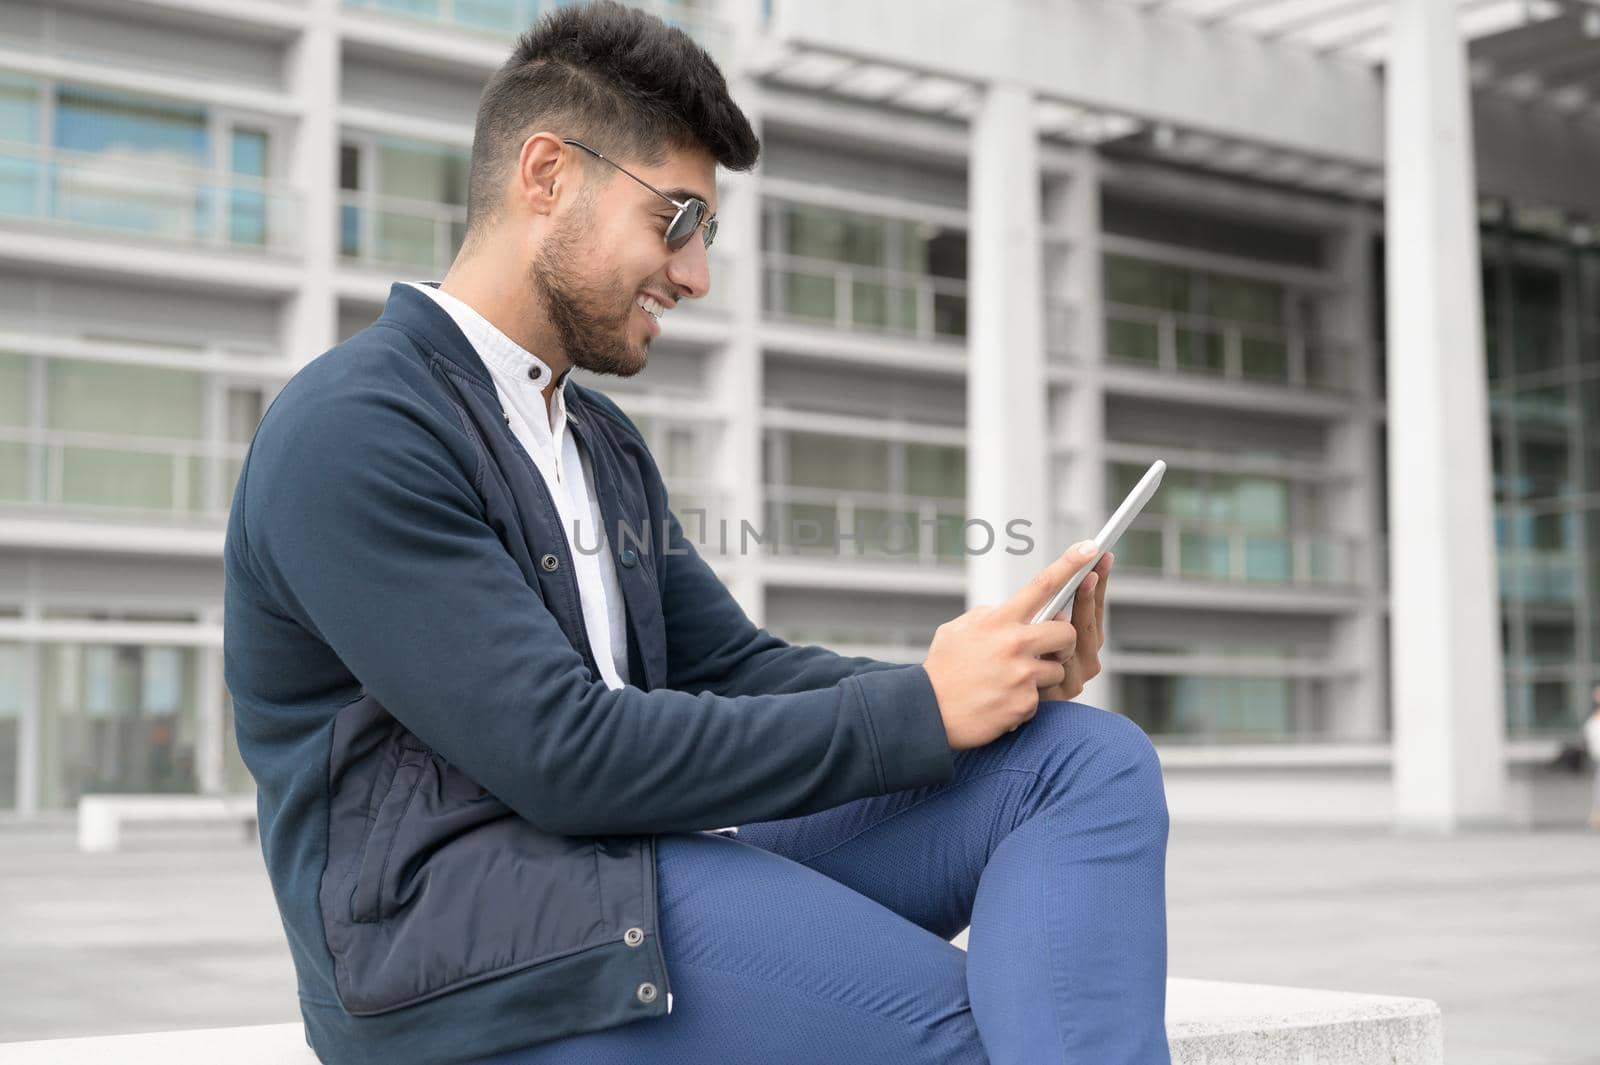 Young handsome men using smartphone in the city. Smiling young man texting on his mobile phone. Coffee break. Modern lifestyle, connection, business concept. High quality photo.